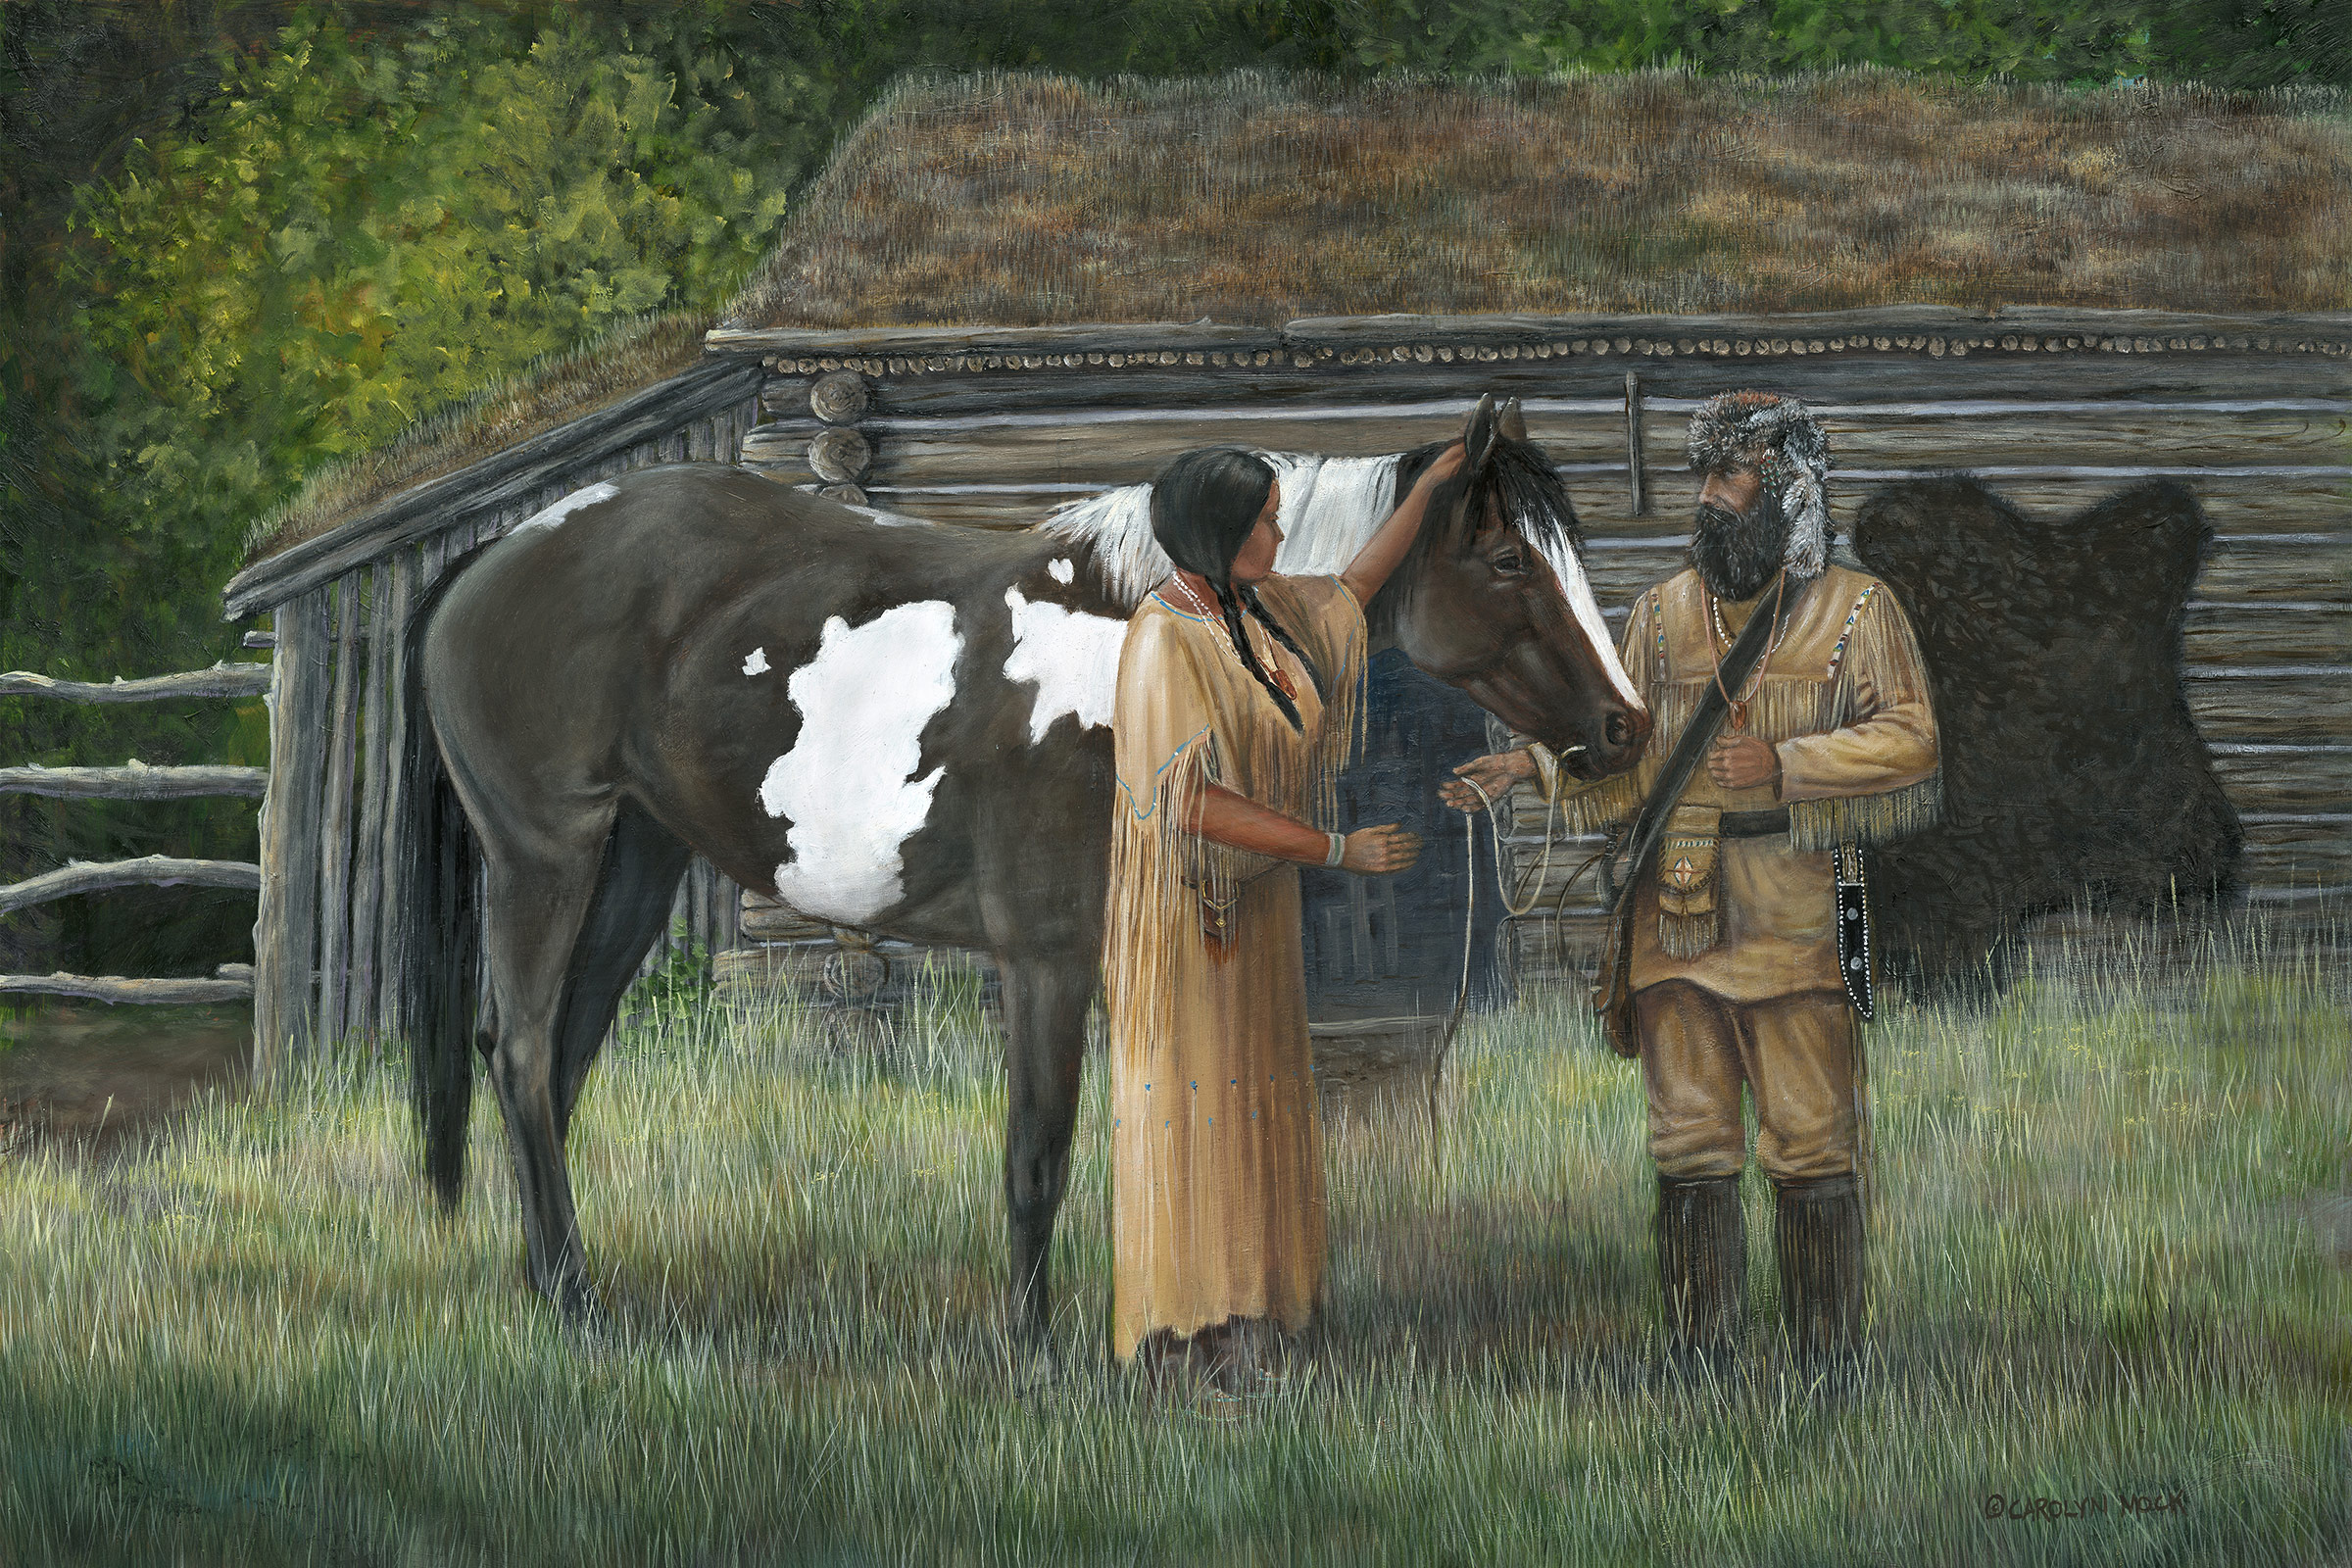 A Native American woman is gifted a horse